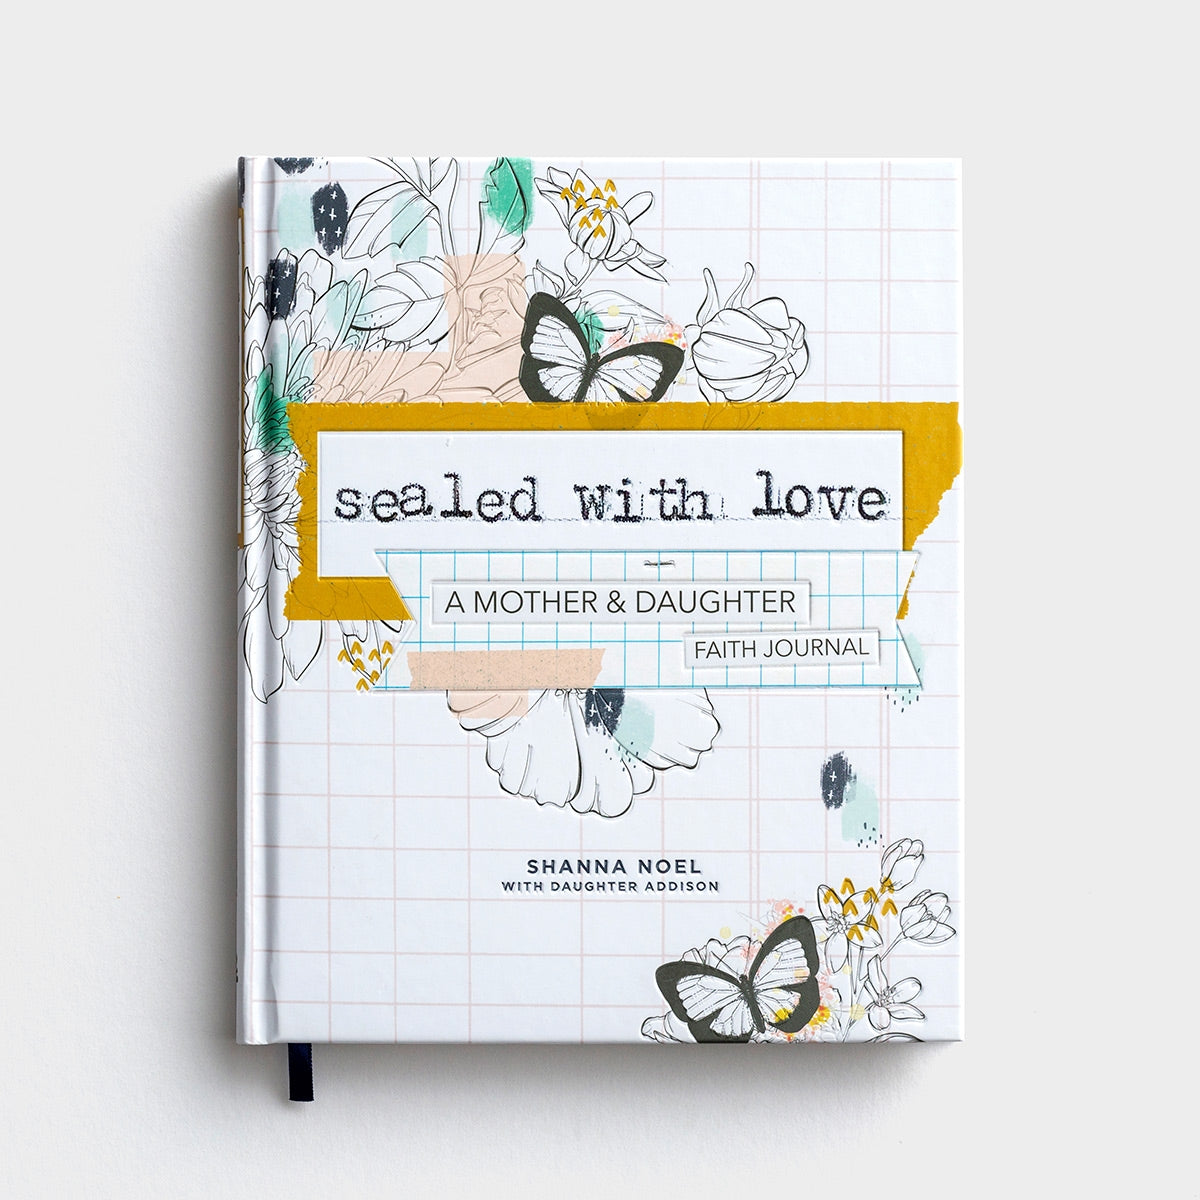 Sealed With Love- A Mother & Daughter Faith Journal